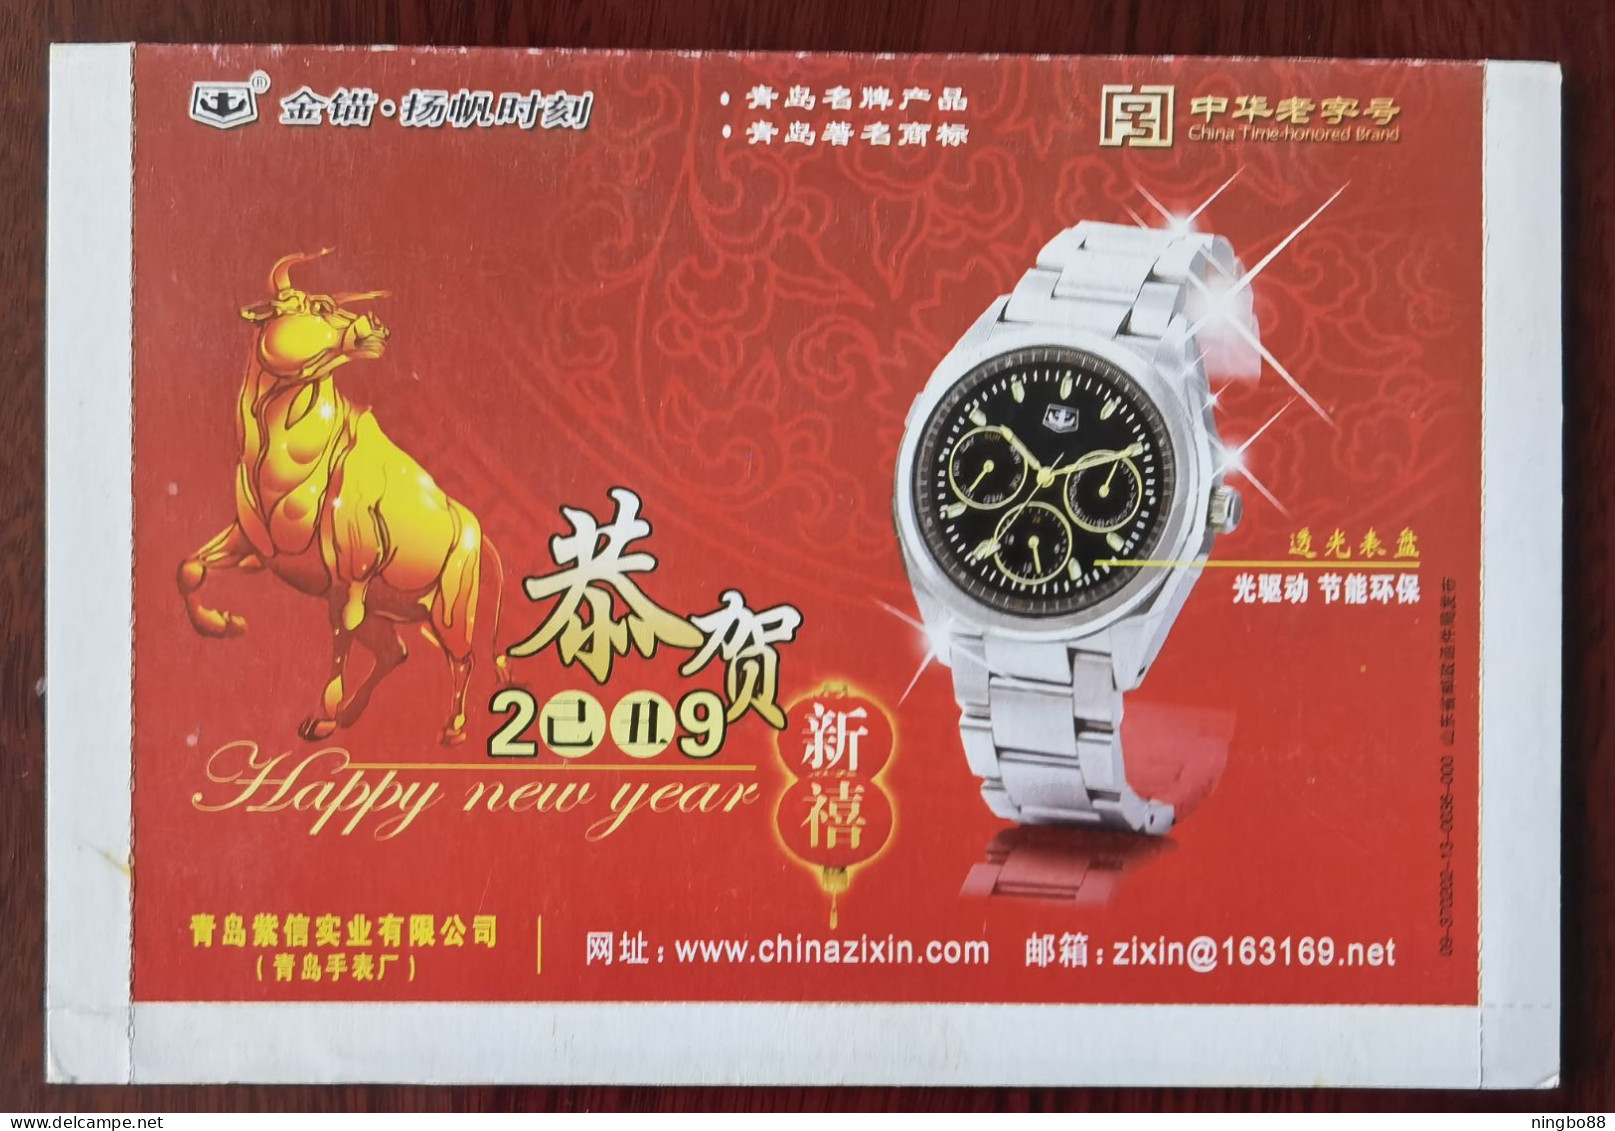 China Time-honored Brand Golden Anchor Photokinetic Energy Watch,China 2009 Qingdao Watch Factory Advertising PSL - Relojería